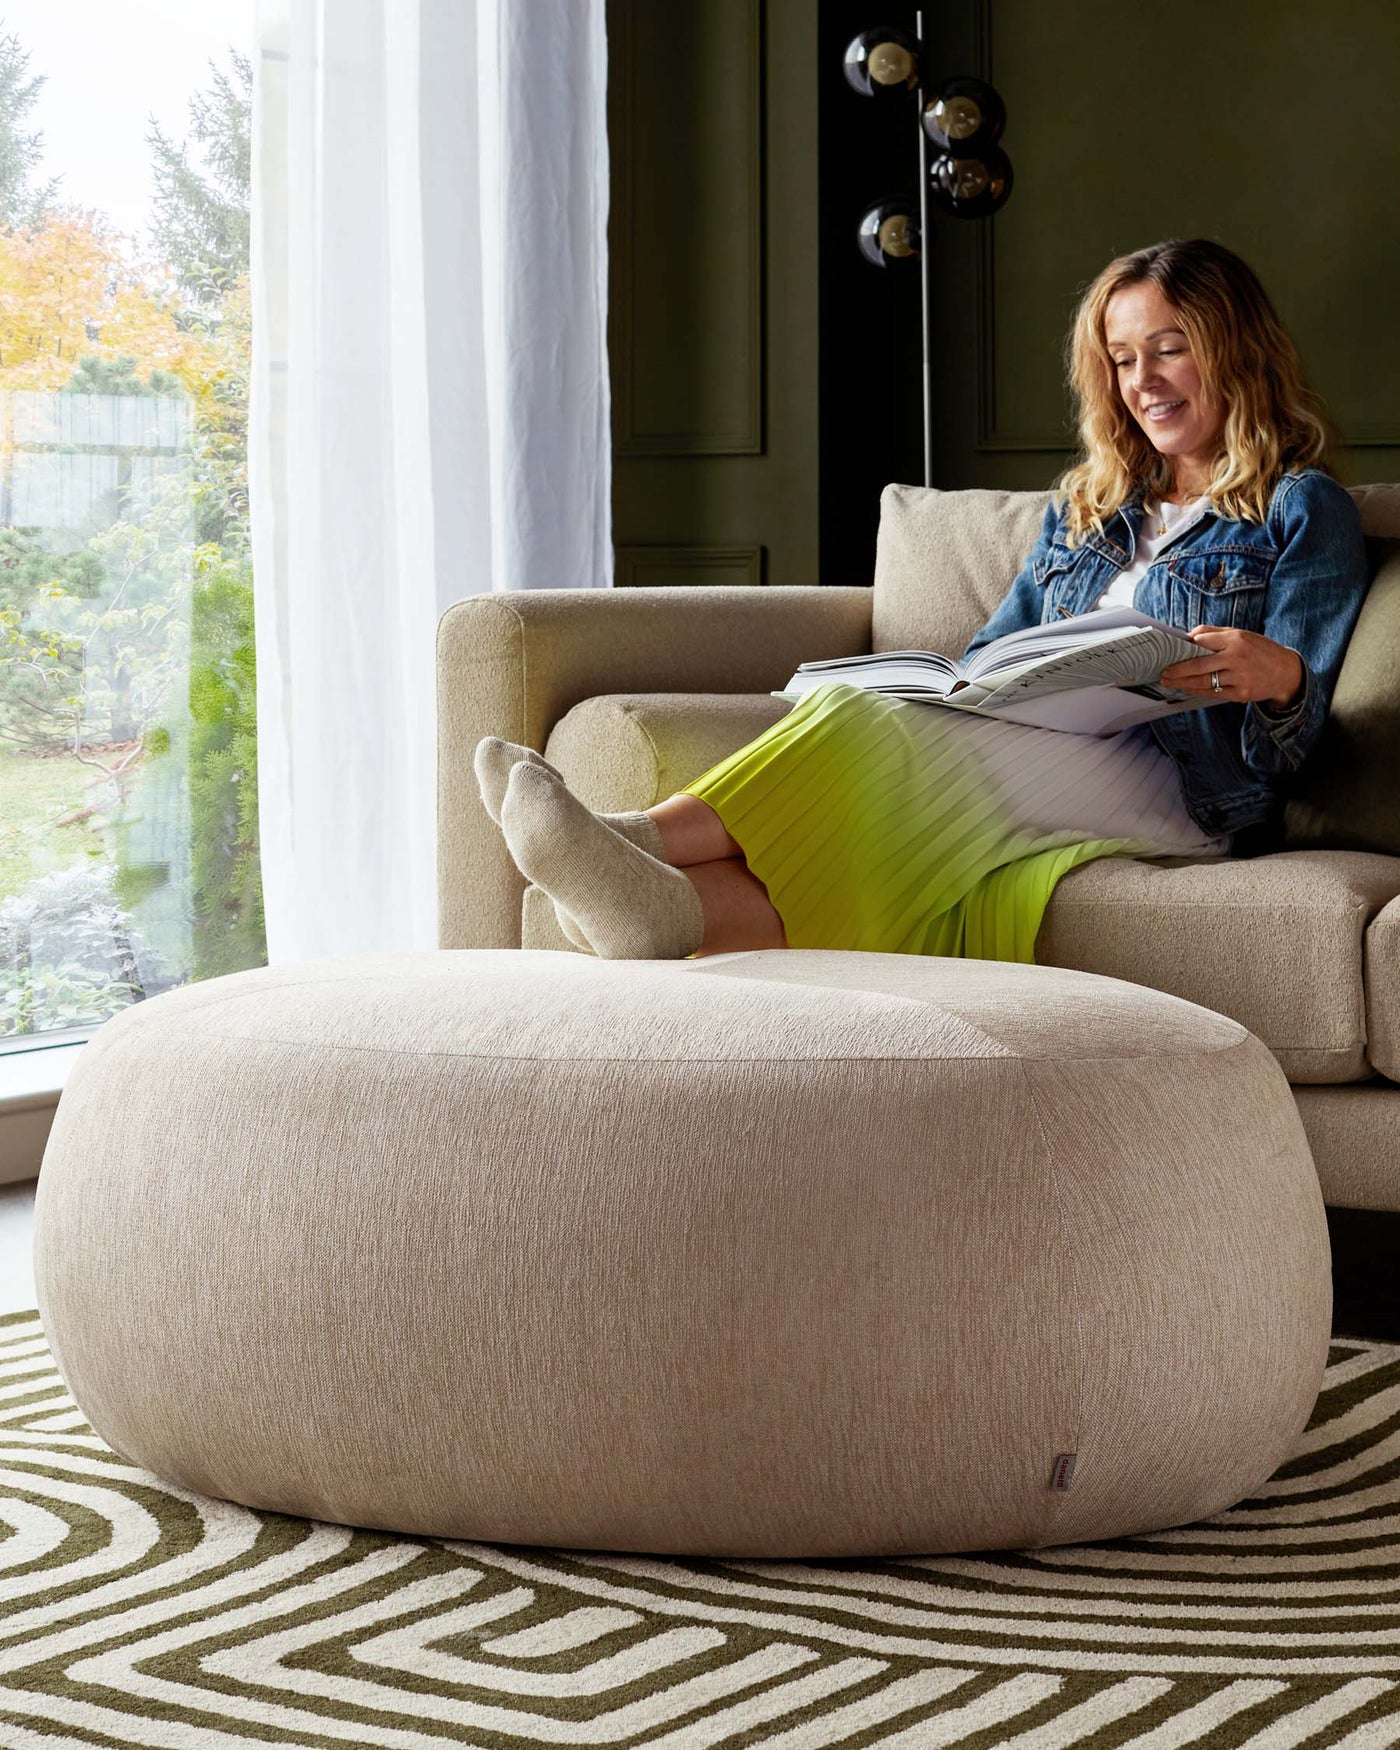 A contemporary beige fabric upholstered ottoman with a cylindrical silhouette in front of a coordinating beige armchair, set upon a patterned area rug with geometric lines.